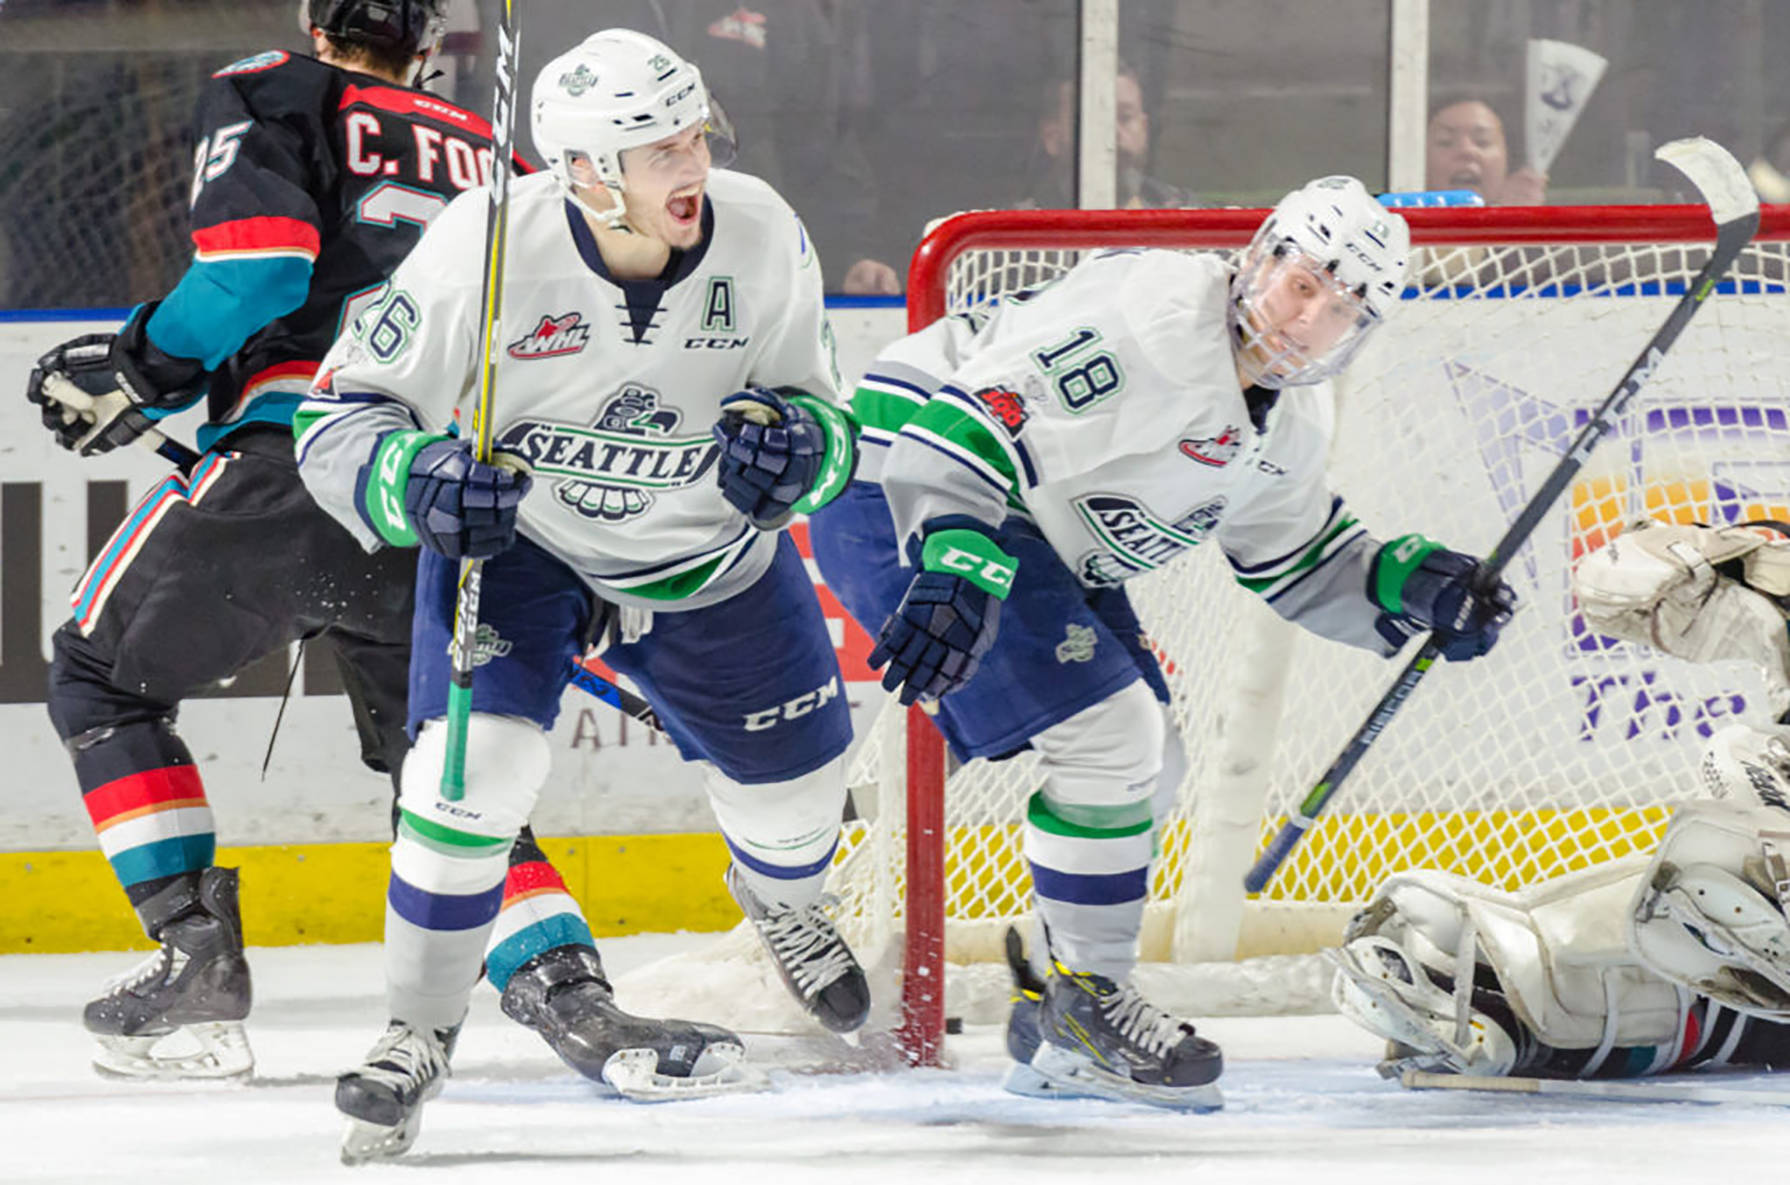 The Thunderbirds’ Nolan Volcan celebrates one of his three goals with teammate Sami Moilanen, right, in front of the Rockets’ net during WHL play Friday night. COURTESY PHOTO, Brian Liesse/T-Birds